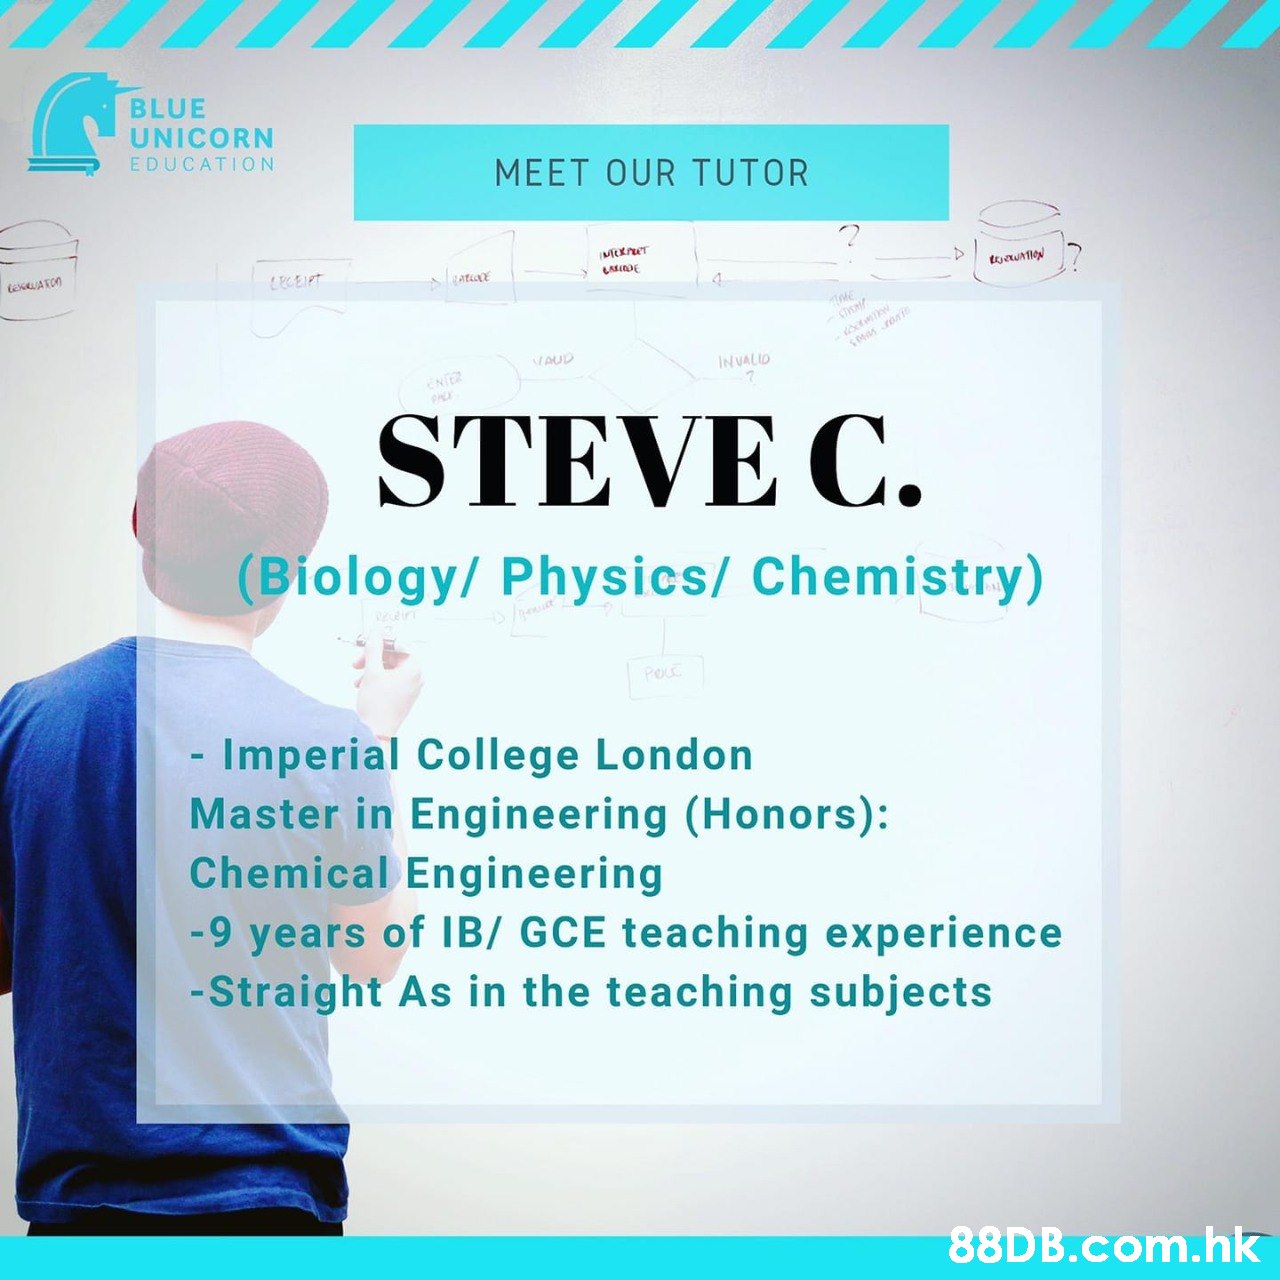 BLUE UNICORN EDUCATION MEET OUR TUTOR LAIDE texATON LECEIPT 4. VAUD INVALID ENTER STEVE C. (Biology/ Physics/ Chemistry) Pou - Imperial College London Master in Engineering (Honors): Chemical Engineering -9 years of IB/ GCE teaching experience -Straight As in the teaching subjects .hk  Text,Font,